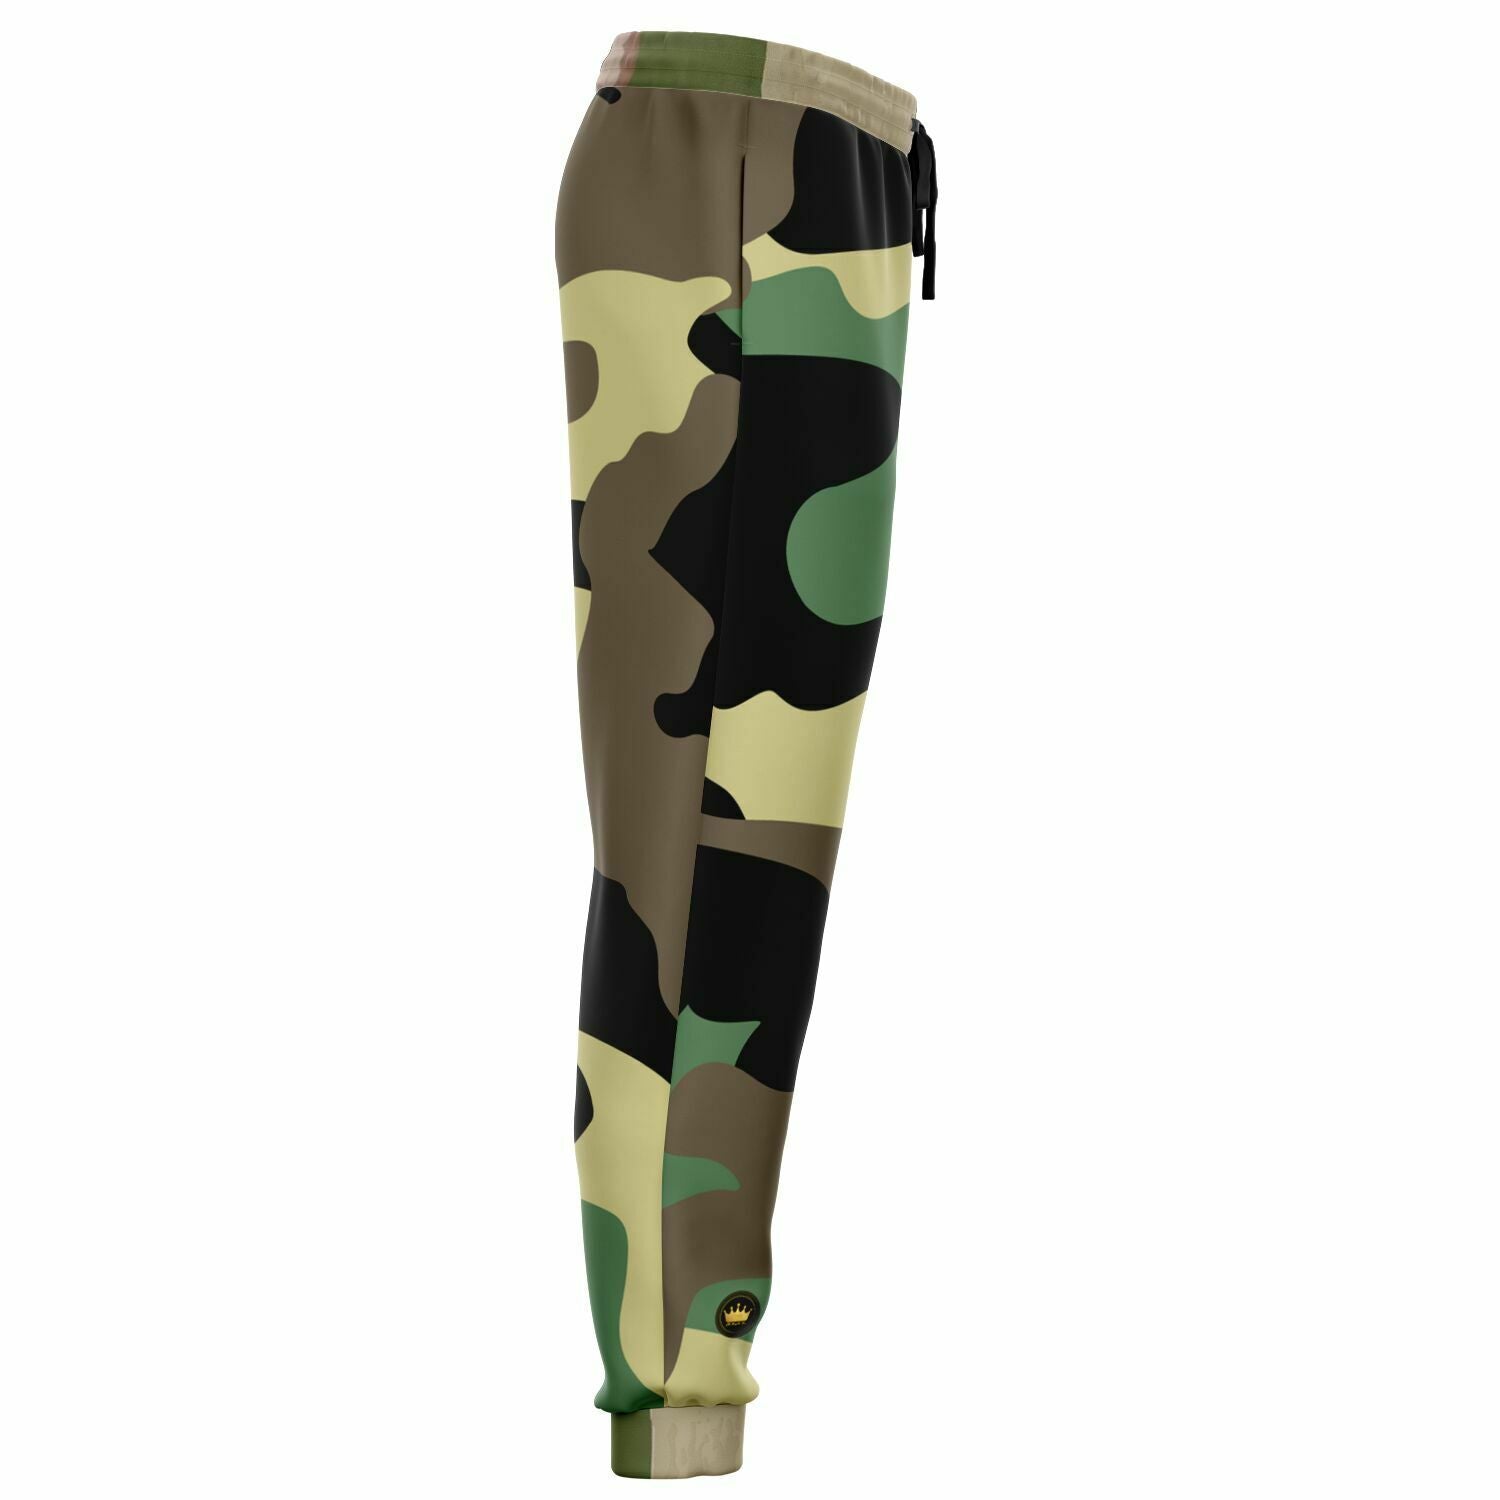 Standard Army Issue Eco-Poly Camo Unisex Joggers